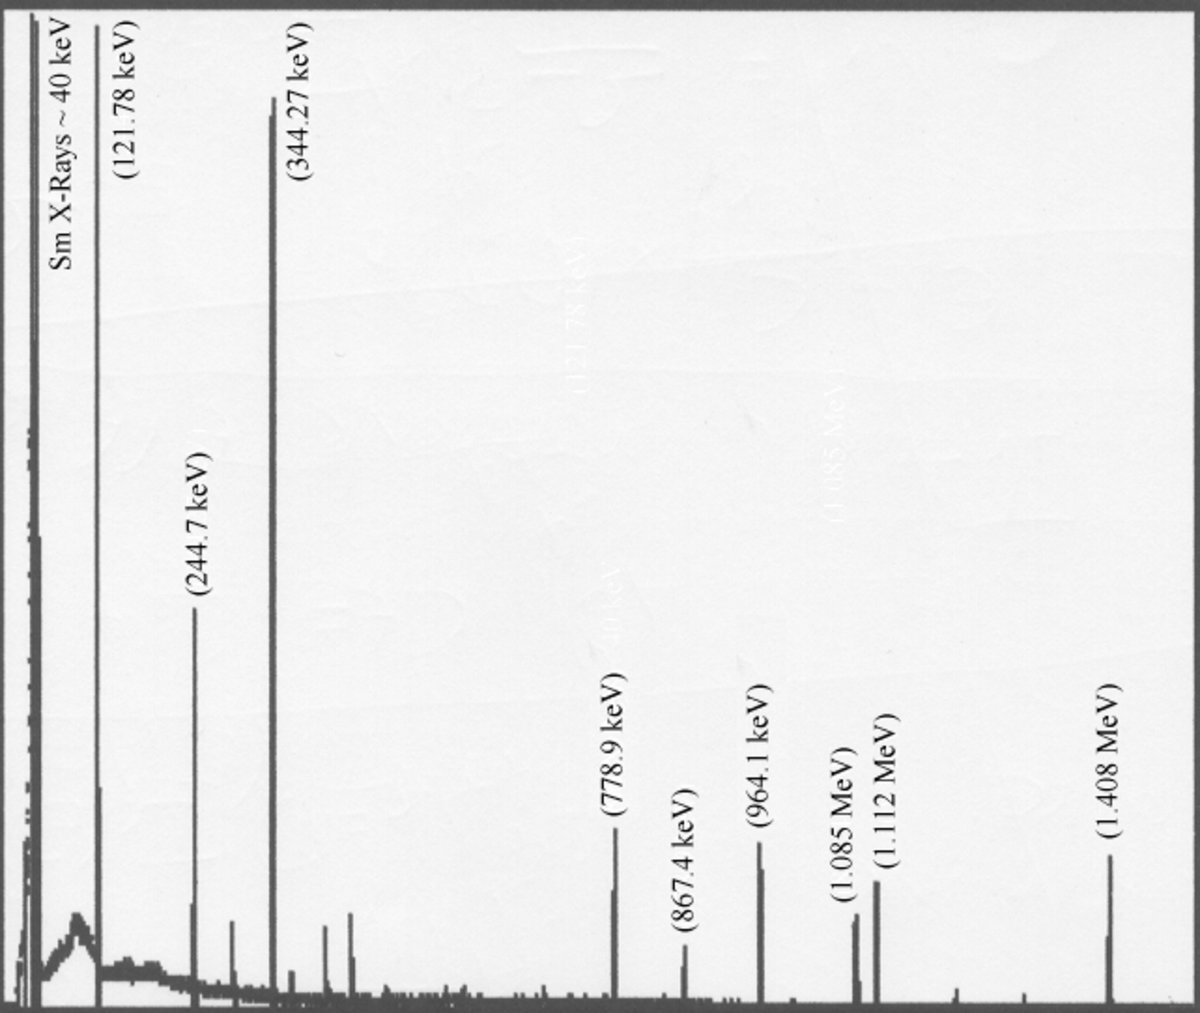 Europium-152 gamma ray spectrum. The larger the peak, the more frequent the emission from the europium source. The energies of the peaks are in electron volts.